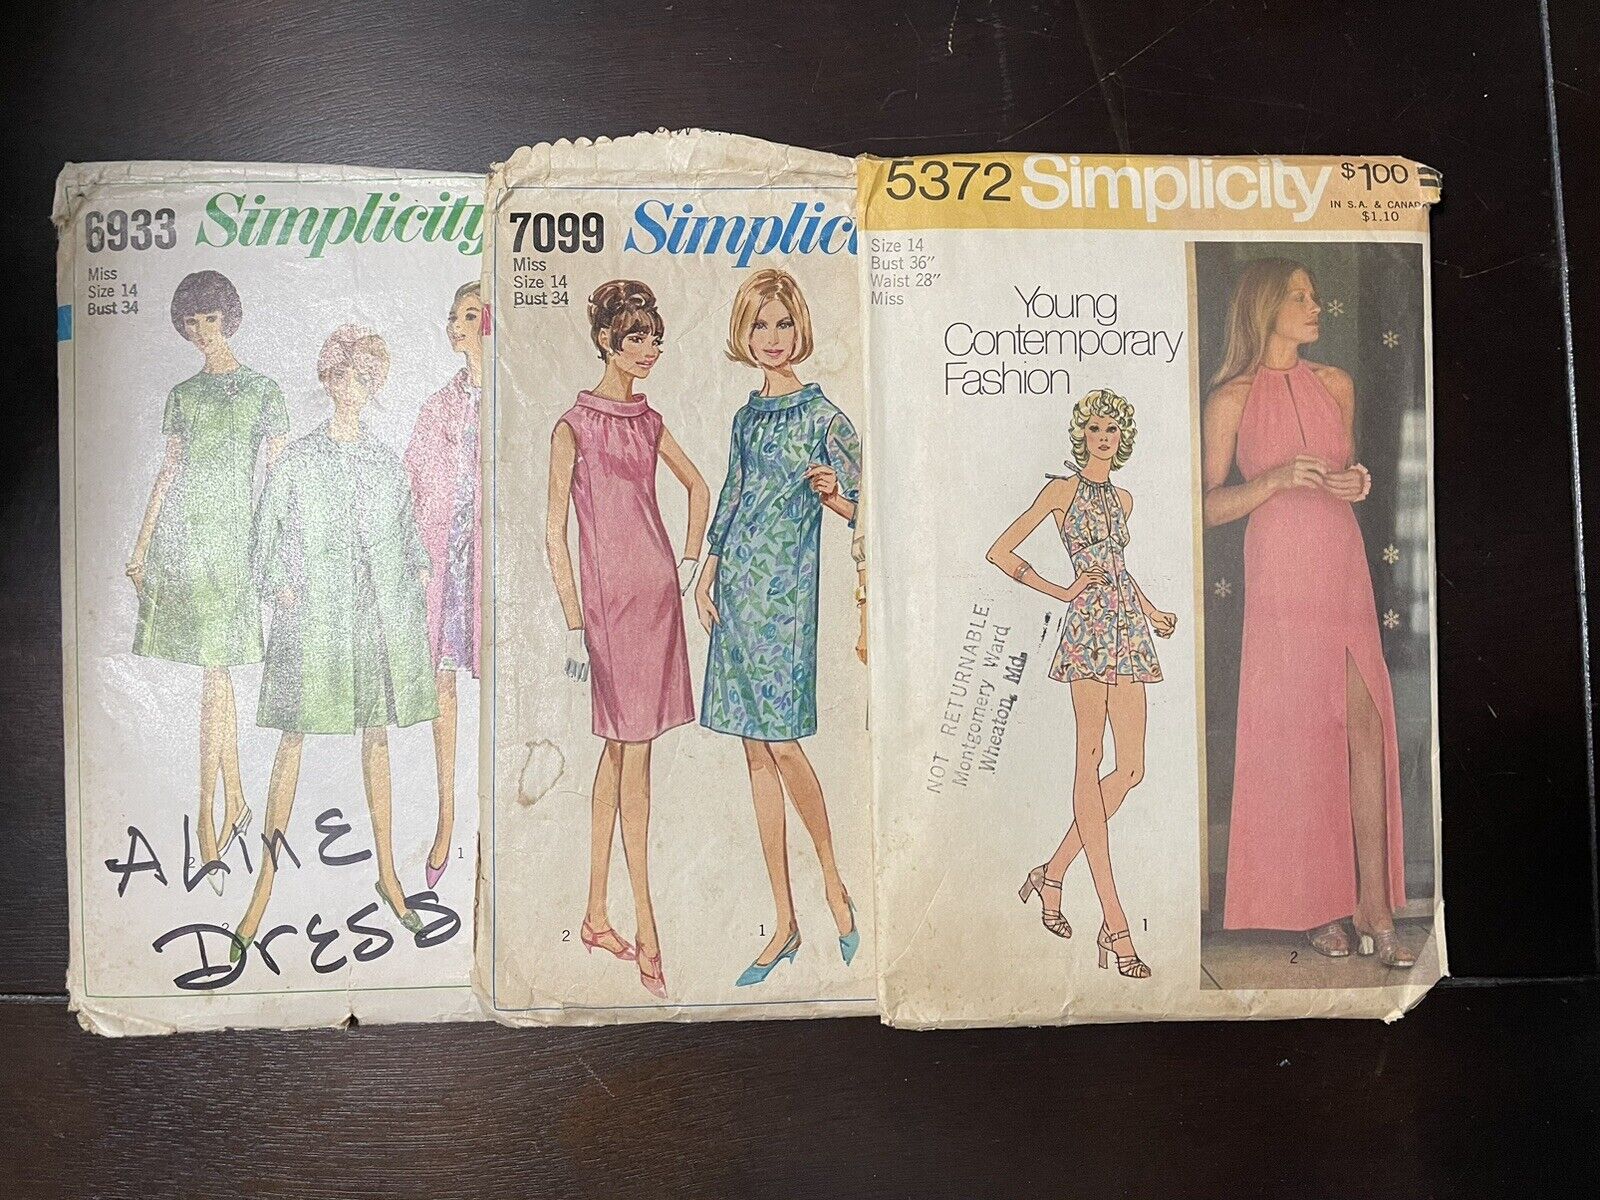 Lot of 3 Vintage 1960s/1970’s Simplicity Sewing Patterns Misses Size 14 (Cut)